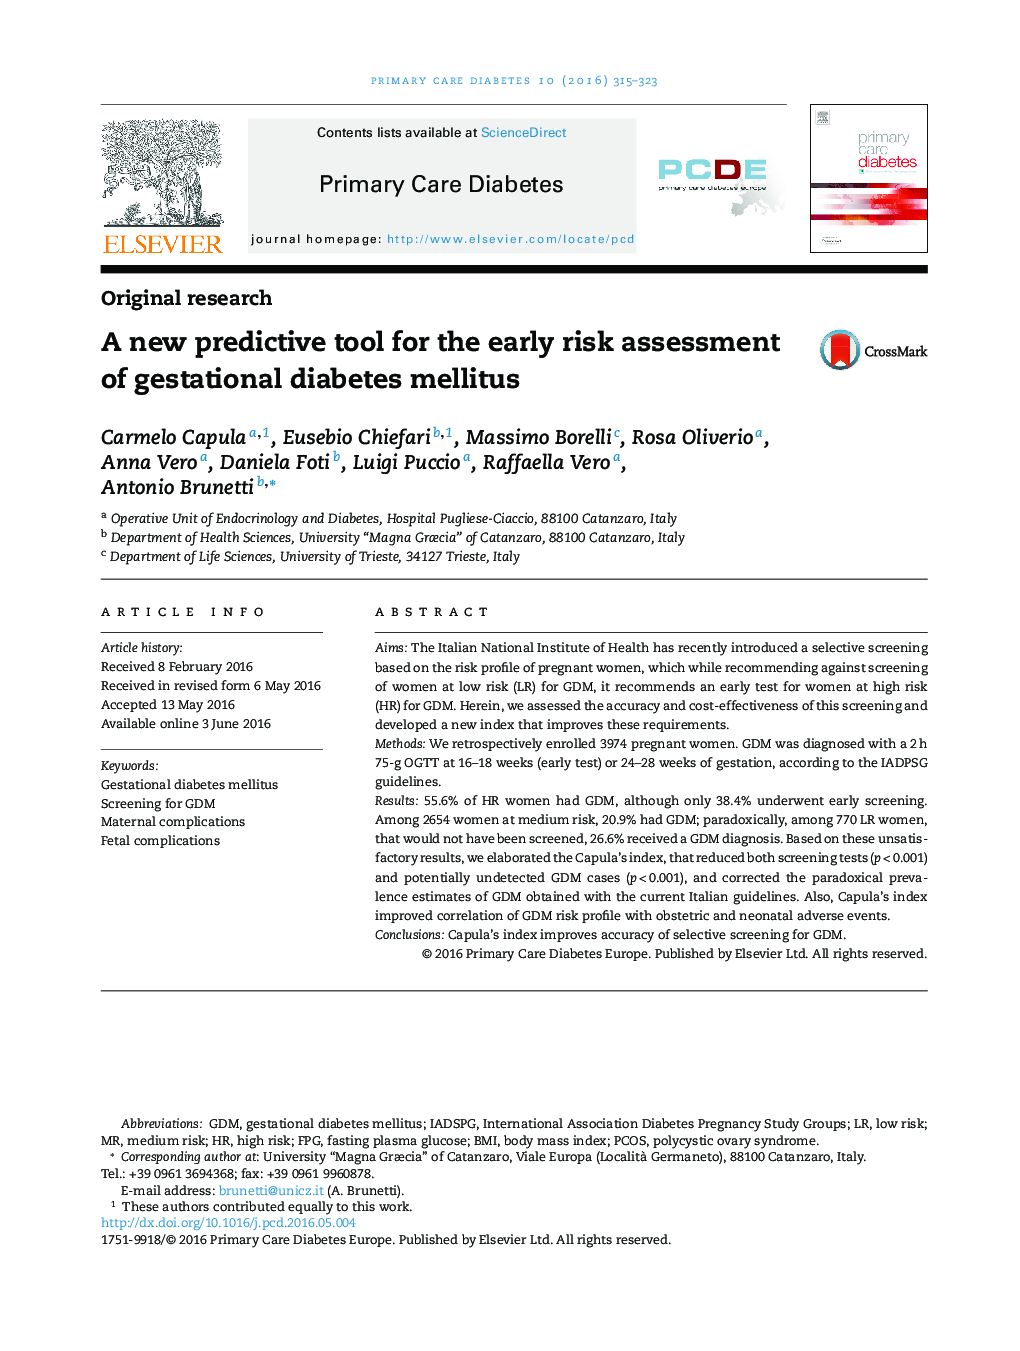 A new predictive tool for the early risk assessment of gestational diabetes mellitus